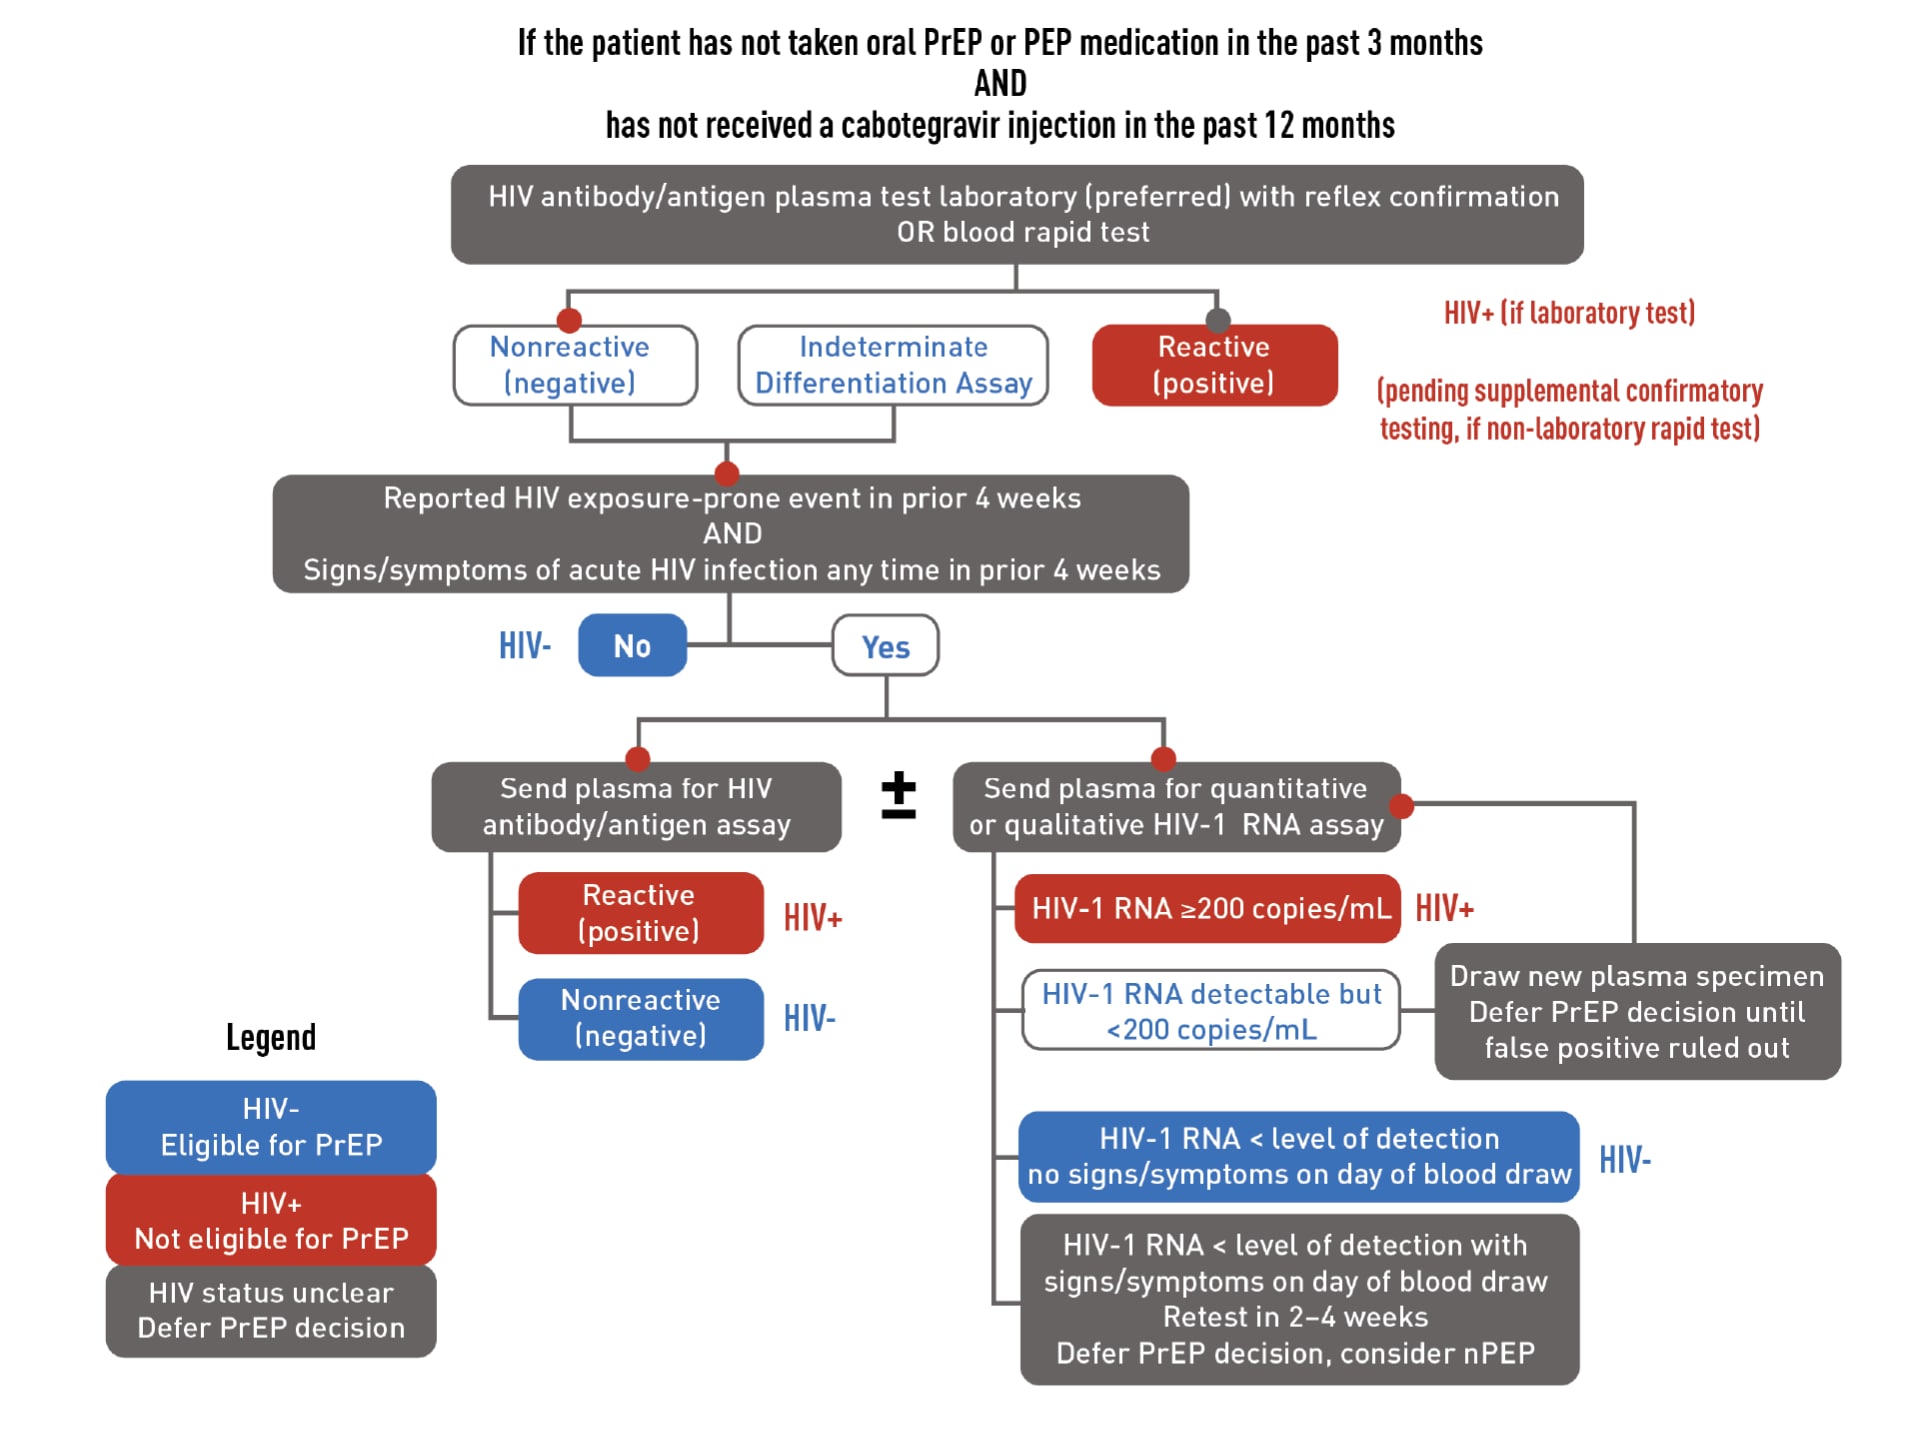 HIV Testing for Patients Starting or Restarting PrEP After a Long Stop (Flowchart)